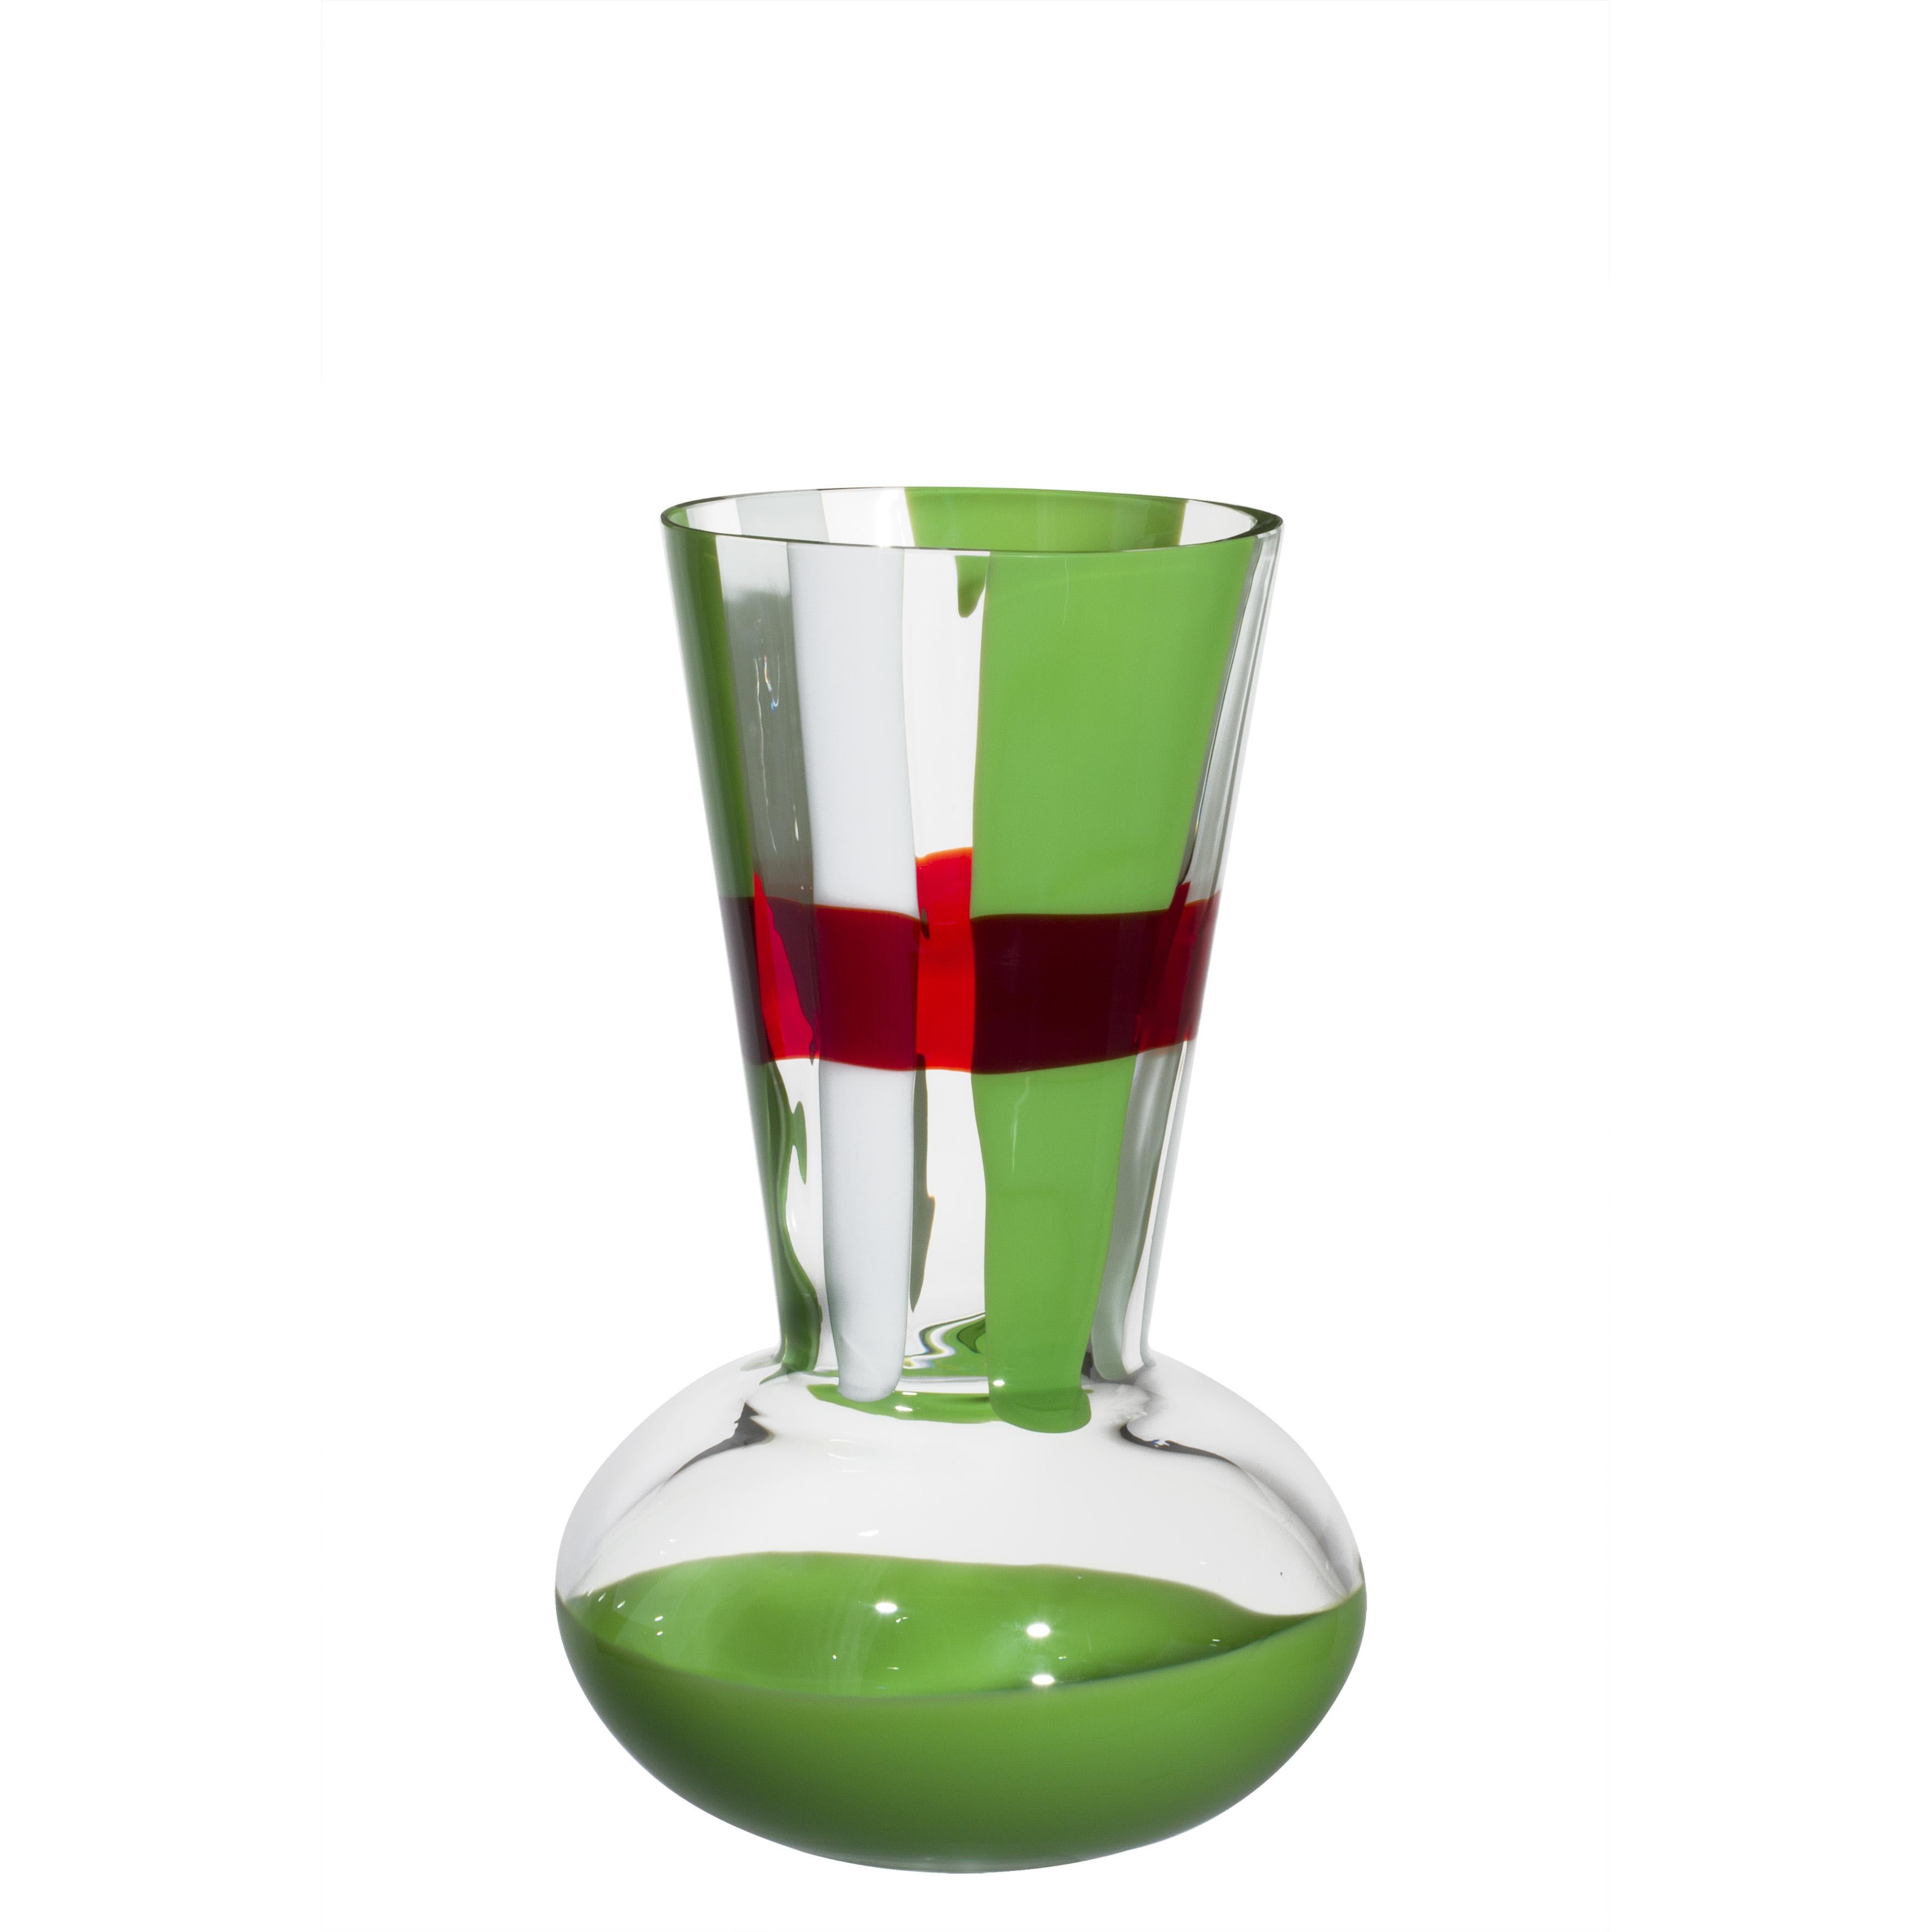 Small Troncosfera Vase in Red, Green and White by Carlo Moretti For Sale